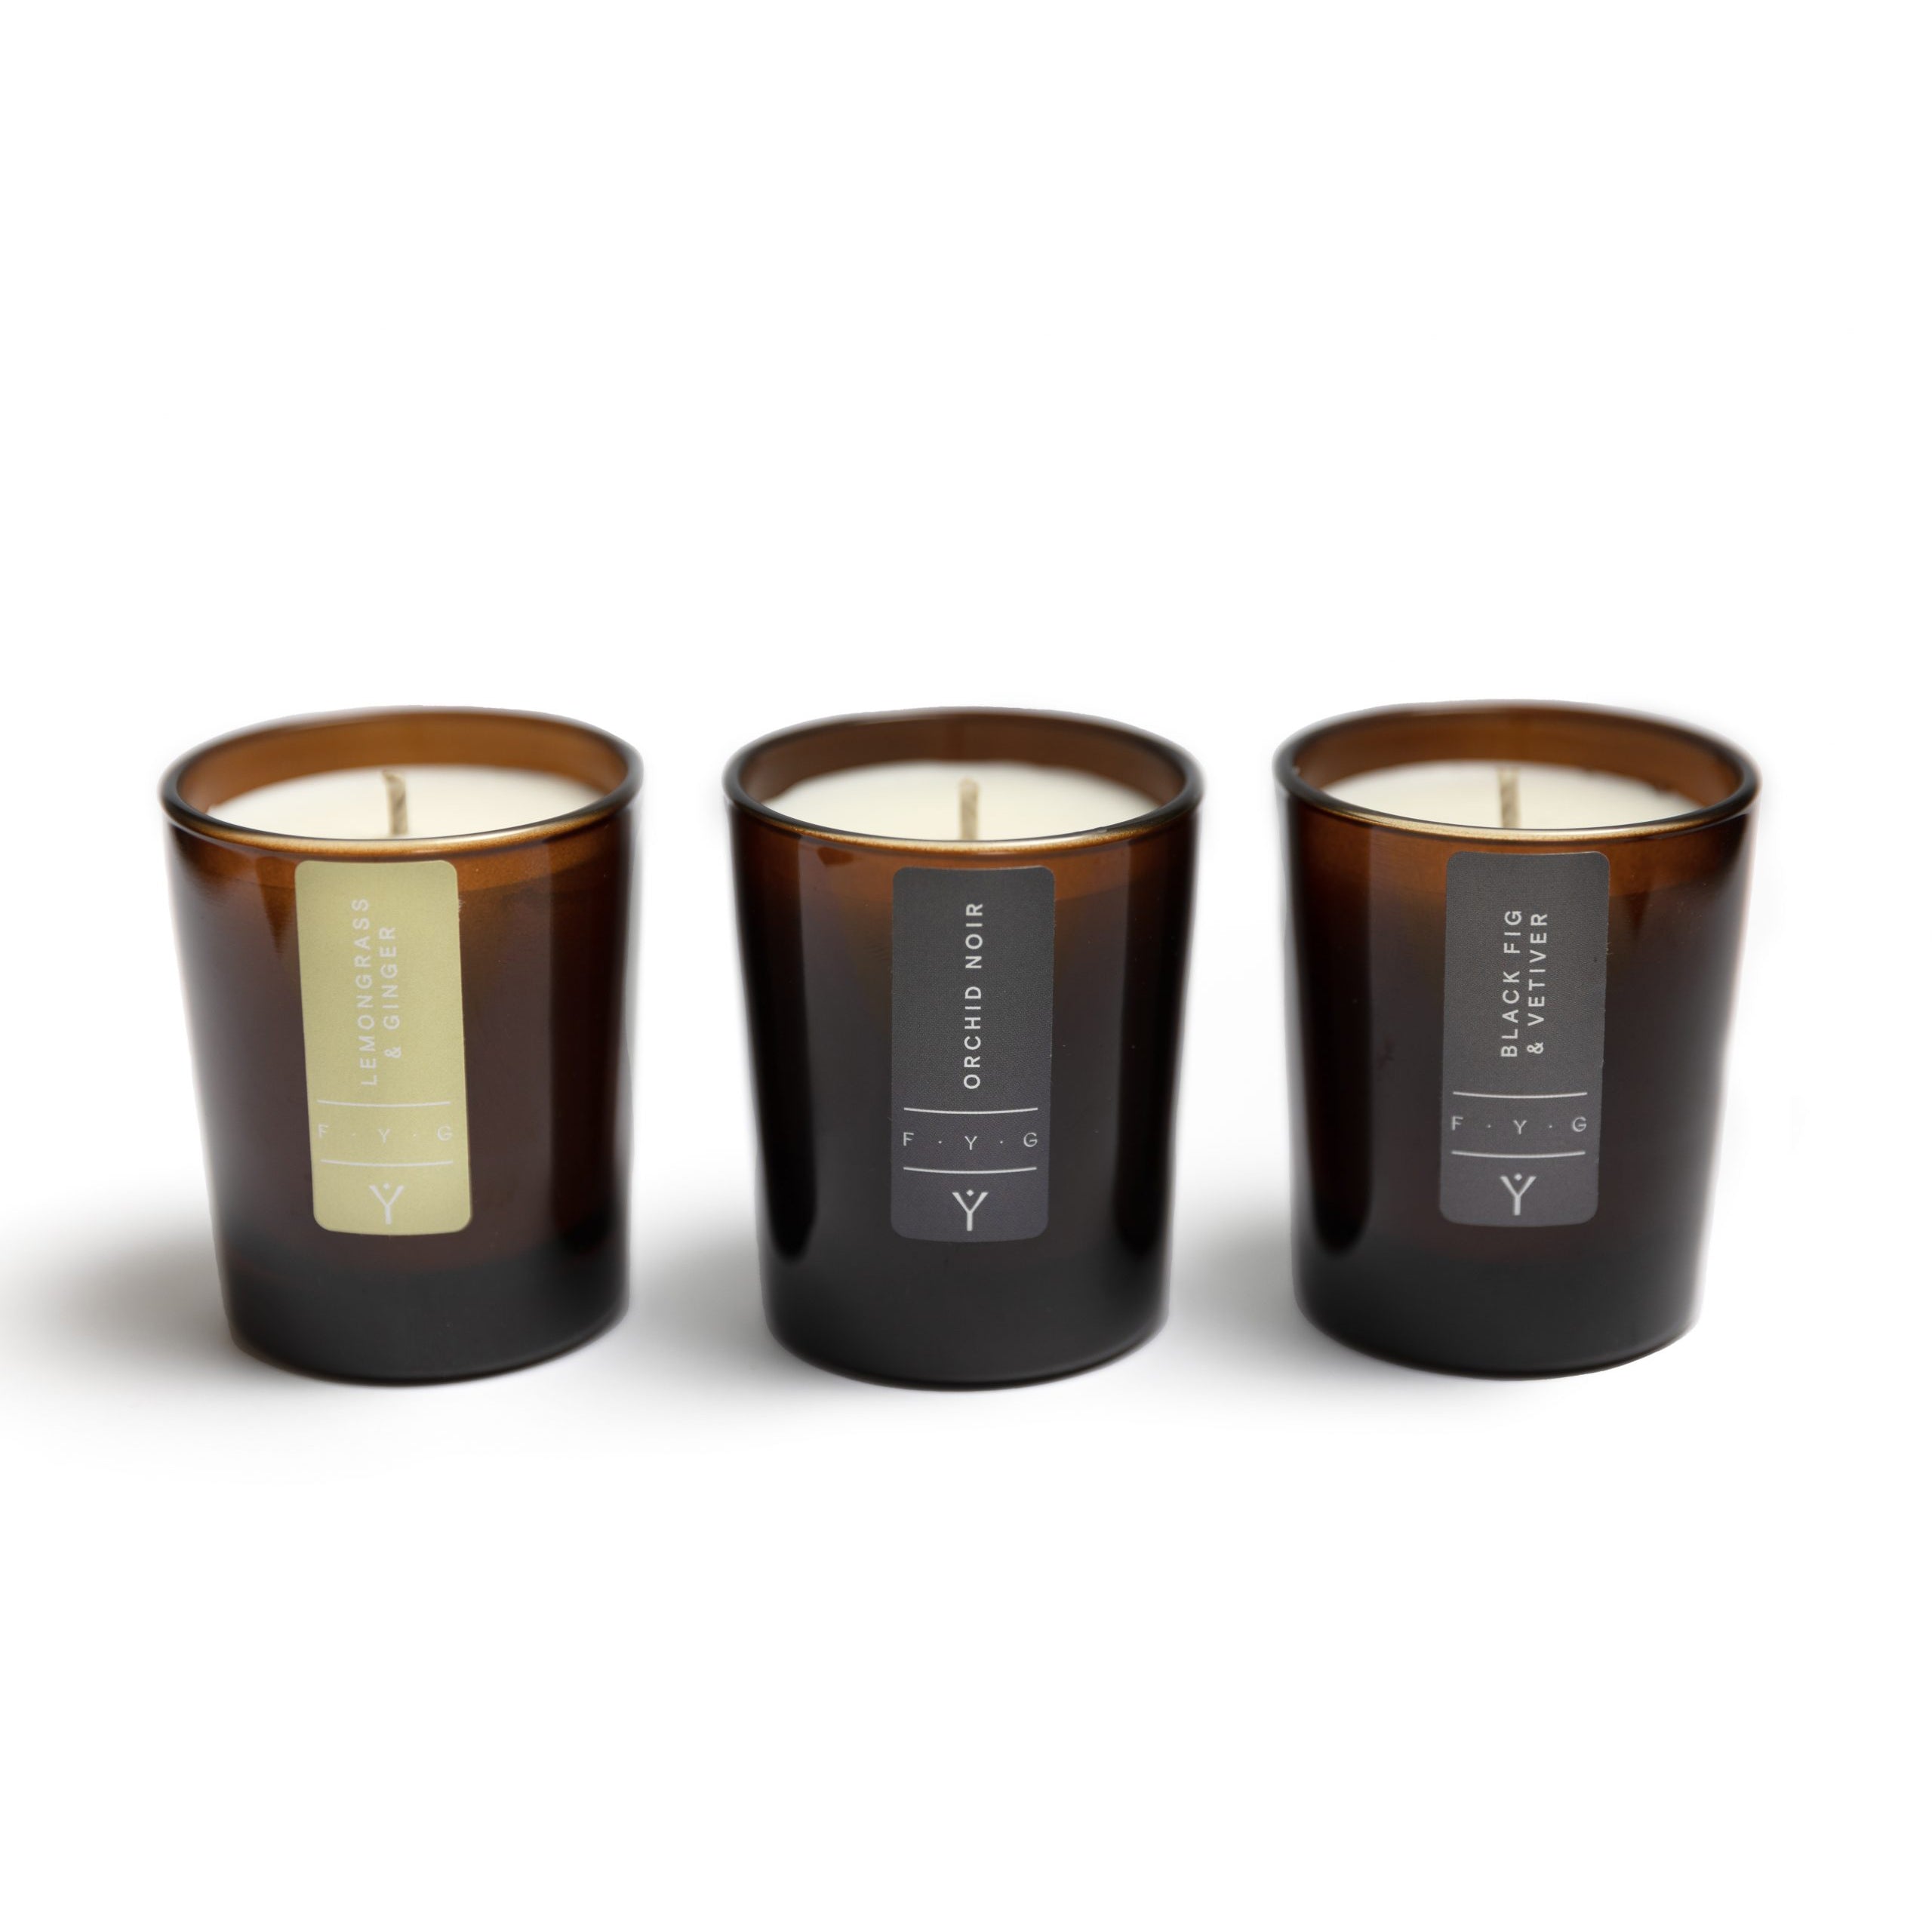 FYG The Indulge Collection Candle Gift Set of 3